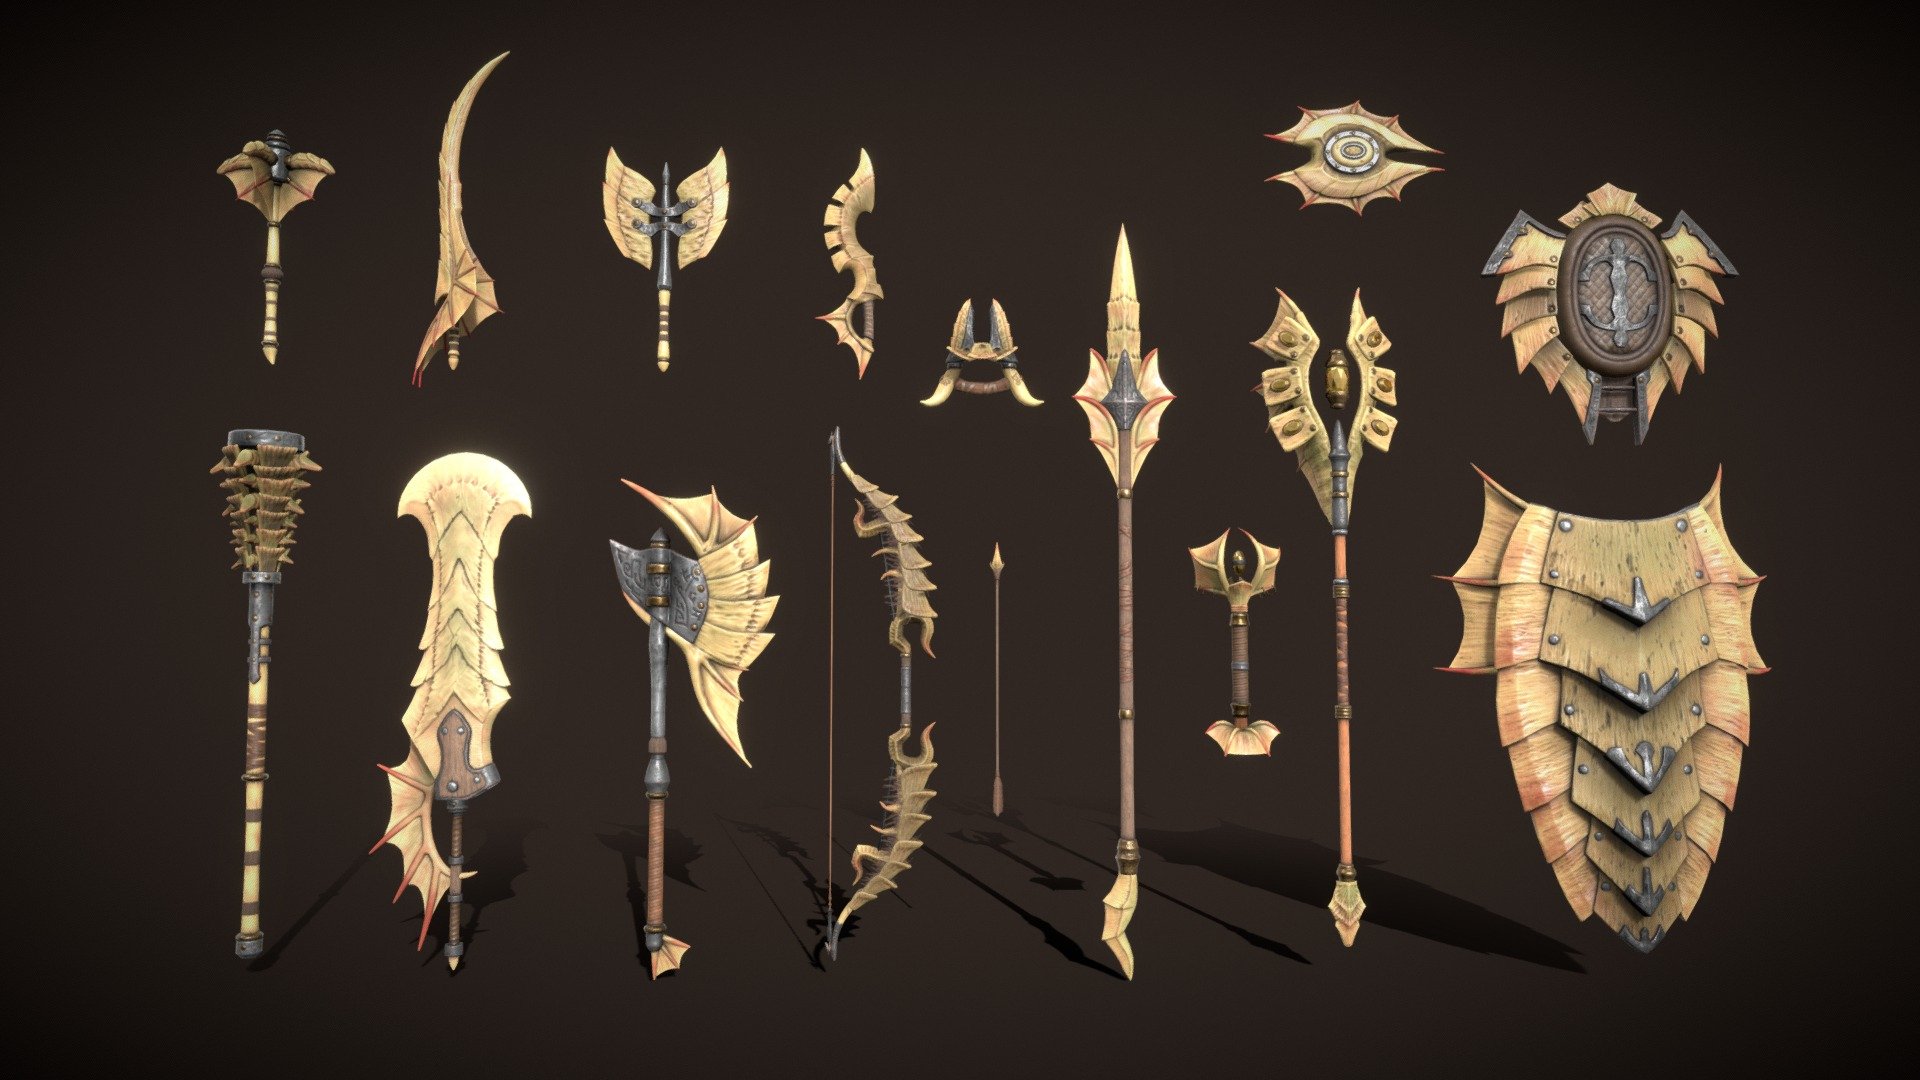 A set of fantasy Chitin weapons.

The set consists of sixteen unique objects.

PBR textures have a resolution of 2048x2048.

Total polygons: 67130 triangles; 34648 vertices.

1) Sword (one-handed) - 3360 tris

2) Sword (two-handed) - 2870 tris

3) Mace (one-handed) - 3570 tris

4) Mace (two-handed) - 13556 tris

5) Ax (one-handed) - 2892 tris

6) Ax (two-handed) - 2964 tris

7) Lance - 2792 tris

8) Dagger - 1776 tris

9) Brass knuckles - 2096 tris

10) Bow - 9300 tris

11) Staff - 5964 tris

12) Scepter - 4424 tris

13) Shield (small) - 3000 tris

14) Shield (medium) - 5212 tris

15) Shield (great) - 2824 tris

16) Arrow - 530 tris

Archives with textures contain:

PNG textures - base color, metallic, normal, roughness, opacity, glow

Texturing Unity (Metallic Smoothness) - AlbedoTransparency, MetallicSmoothness, Normal, Emission

Texturing Unreal Engine - BaseColor, Normal, OcclusionRoughnessMetallic, Emissive - Fantasy Weapon Chitin set - 3D model by zilbeerman 3d model